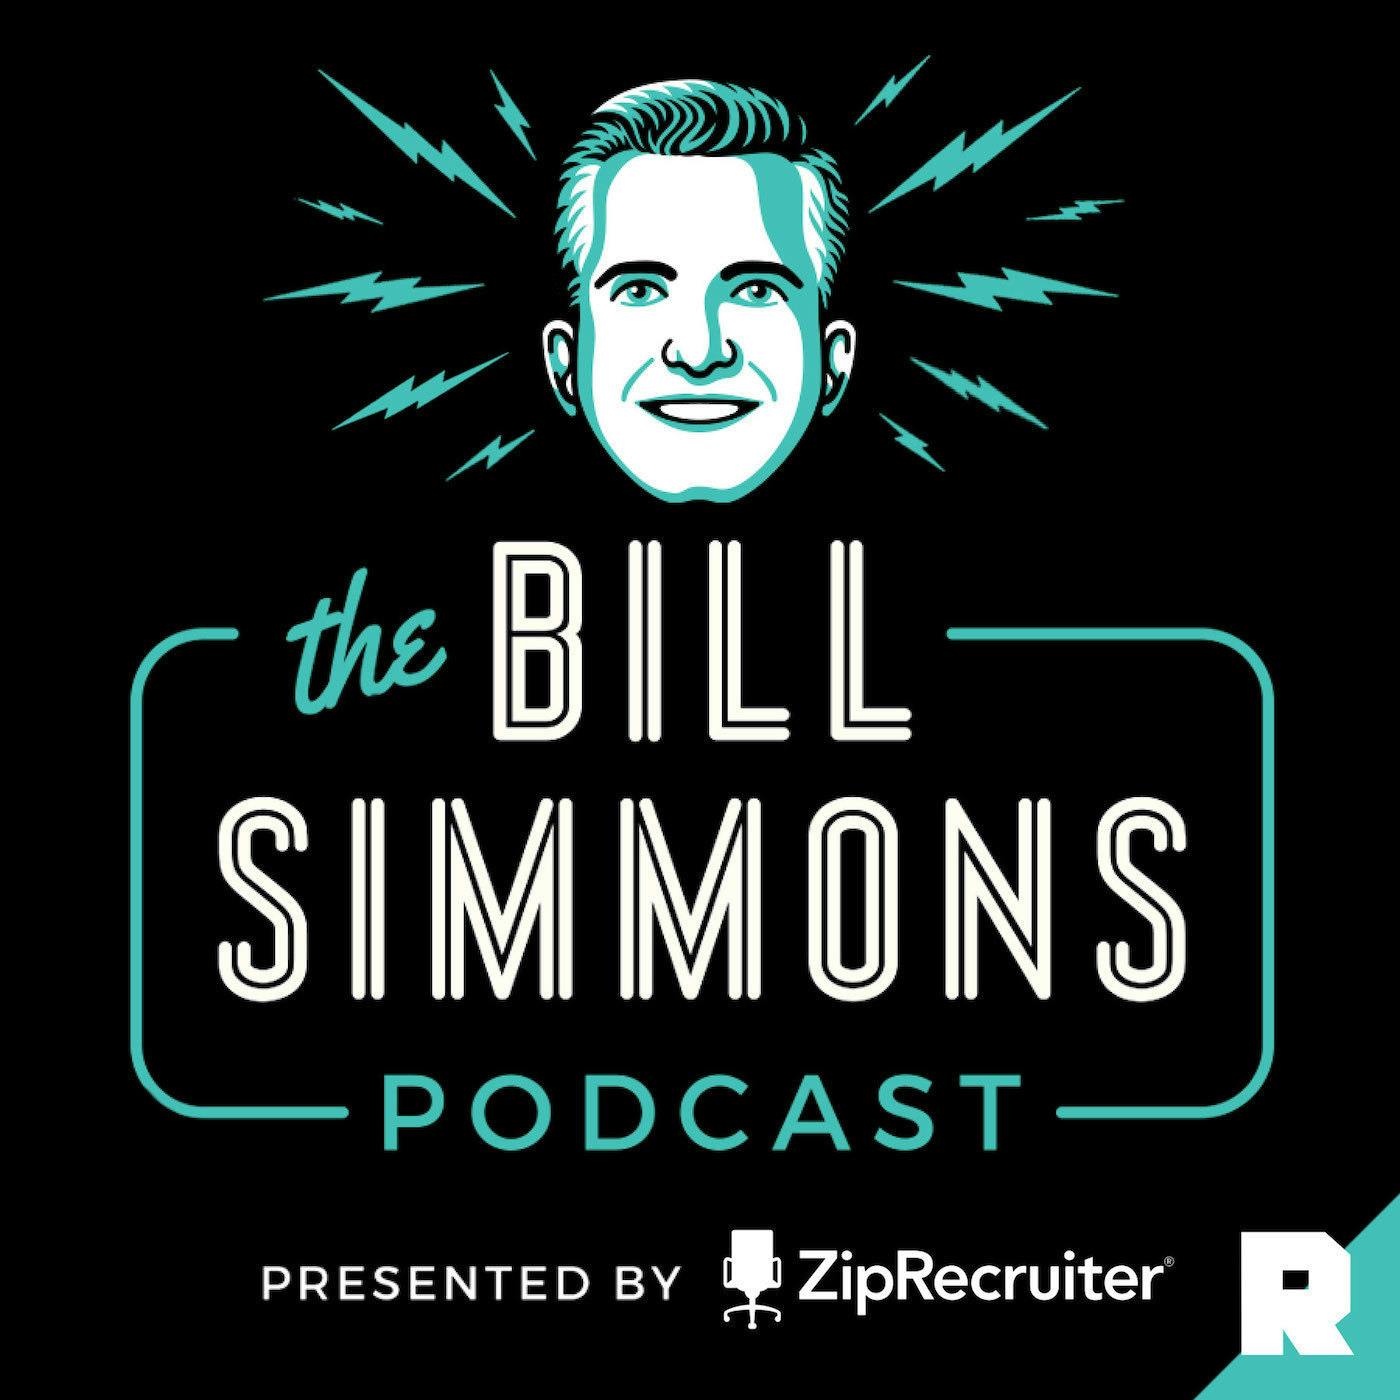 Denzel Washington on ’He Got Game,’ the Yankees, and LeBron. Plus, Yacht Rock Palooza. | The Bill Simmons Podcast (Ep. 390)